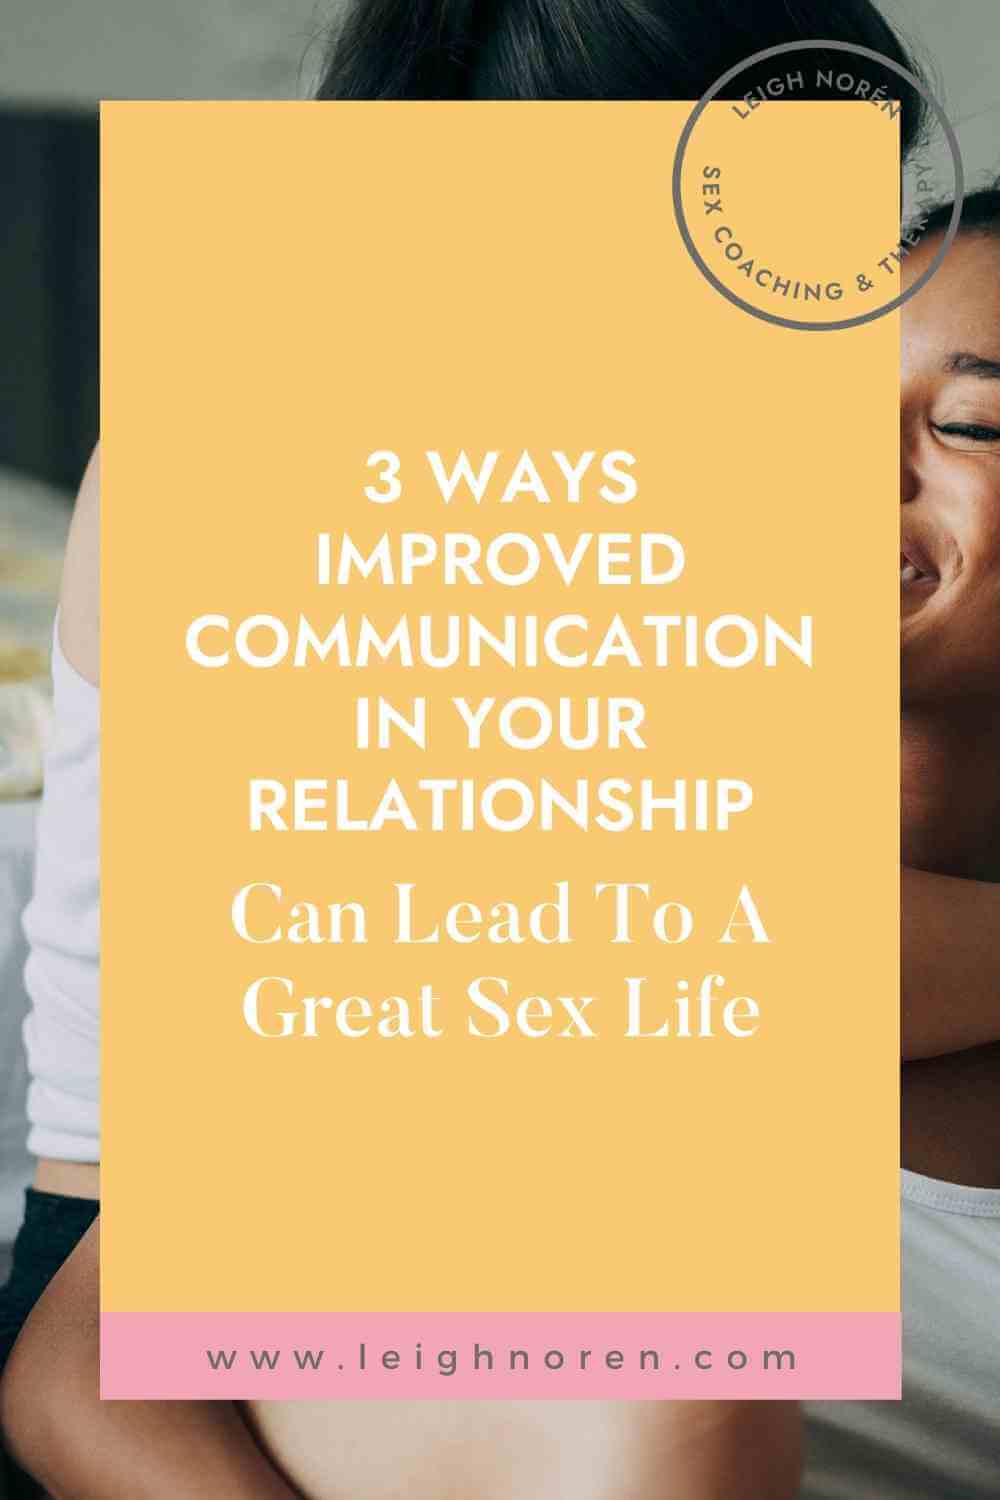 3 Ways Improved Communication In Your Relationship Can Lead To A Great Sex Life